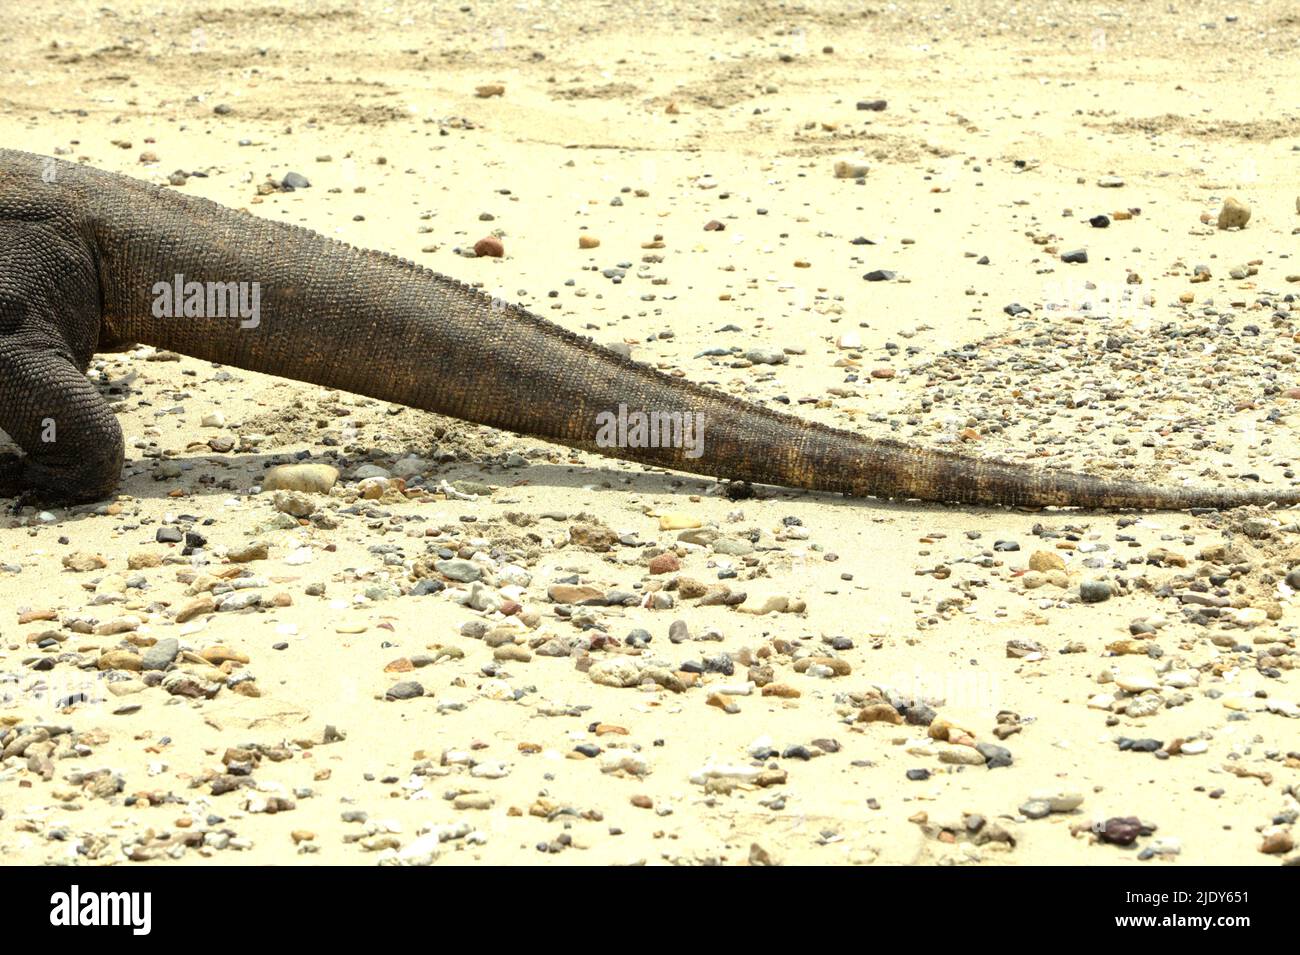 The tail of a komodo dragon (Varanus komodoensis) that is walking on a beach in Komodo Island, Komodo National Park, which is administratively located in Komodo, West Manggarai, East Nusa Tenggara, Indonesia. According to a 2021 data, approximately 2,450 komodo dragon individuals are roaming in Komodo National Park alone (the islands of Komodo, Rinca, Nusa Kode and Gili Motang). Outside the national park, smaller populations are found in the west coast and north coast of Flores Island in the same East Nusa Tenggara province, Indonesia. Stock Photo